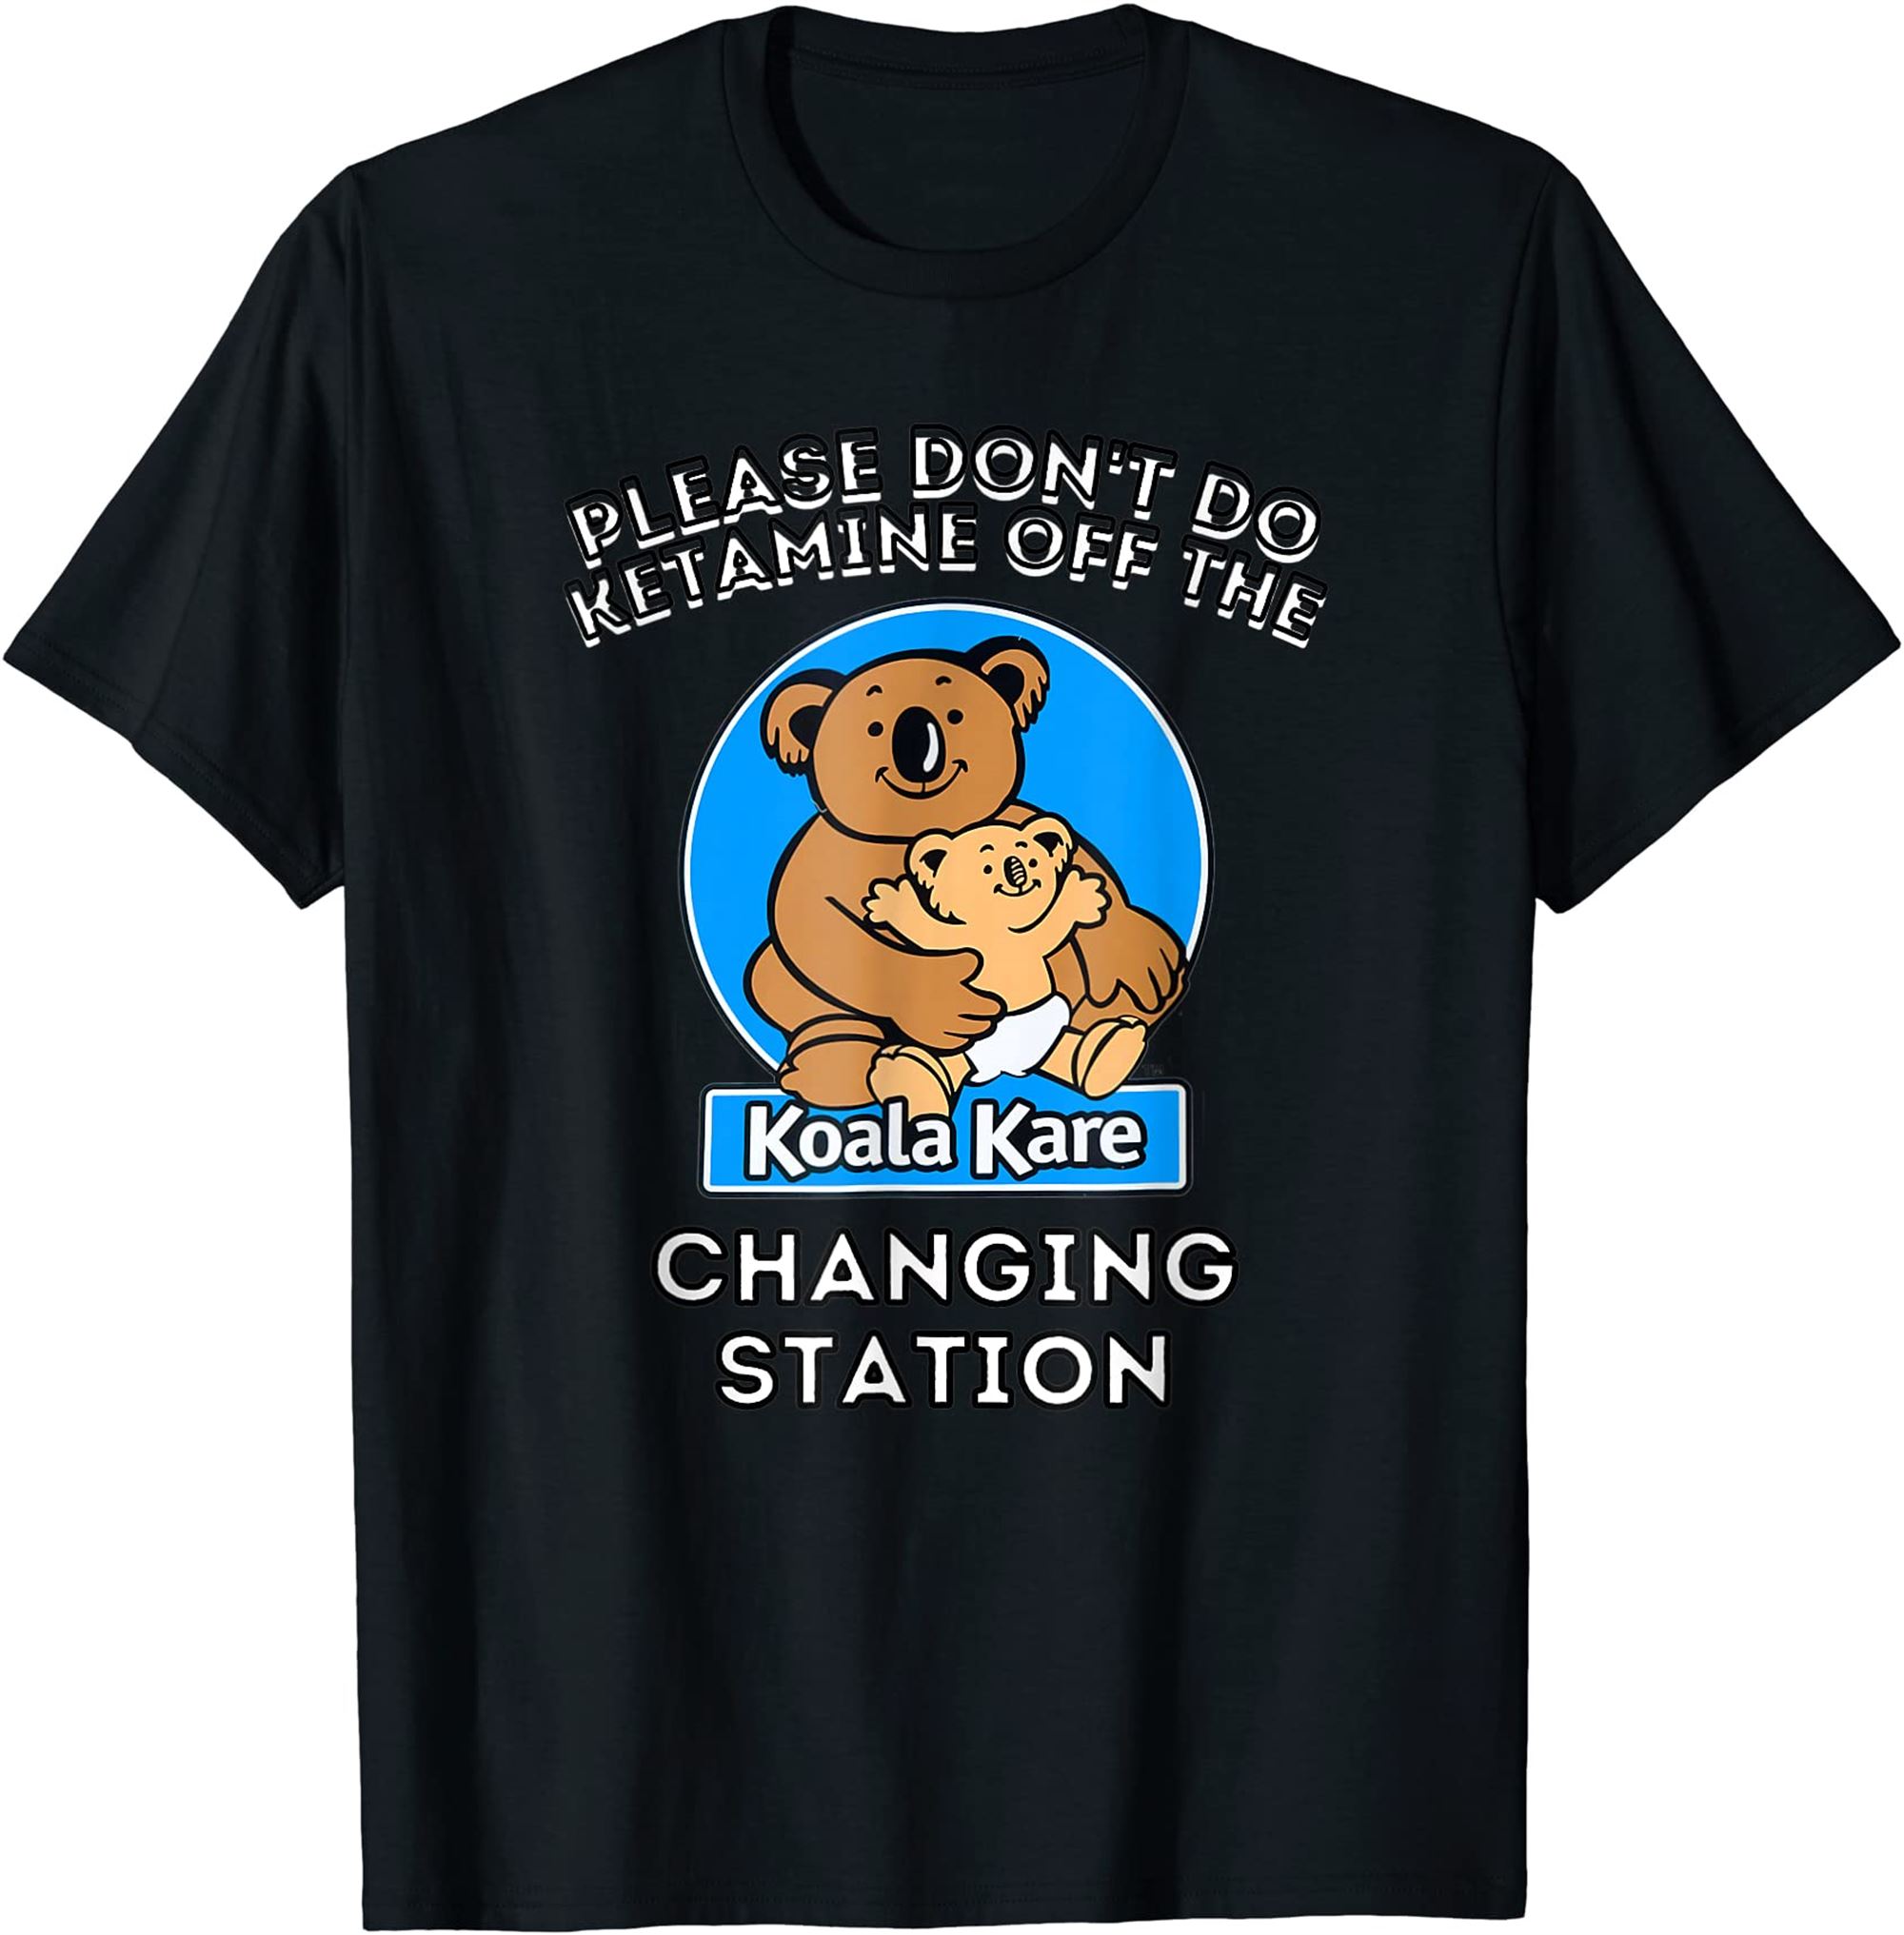 Please Dont Do Ketamine Off The Koala Kare Changing Station T-shirt Plus Size Up To 5xl